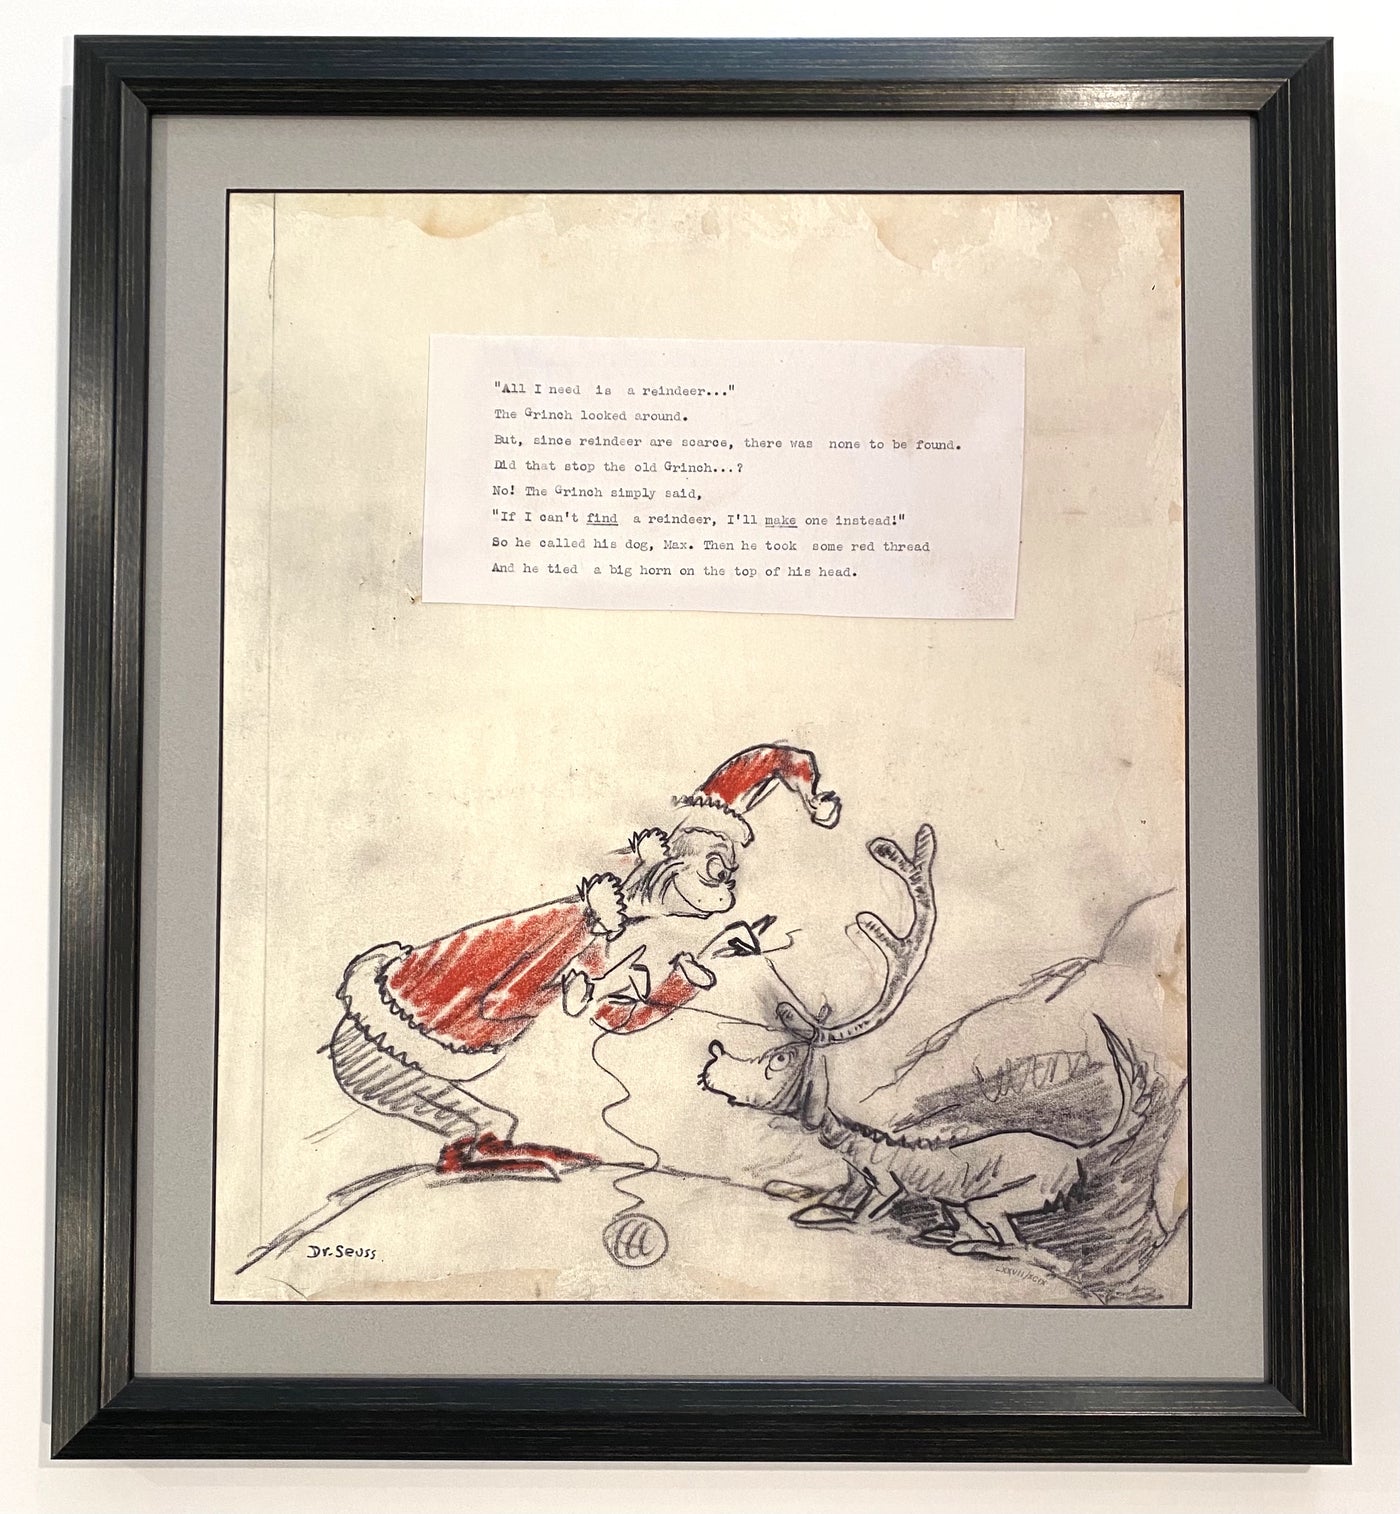 Dr. Seuss How The Grinch Stole Christmas Fine Art Pigment Print Reproduction, All I Need is A Reindeer